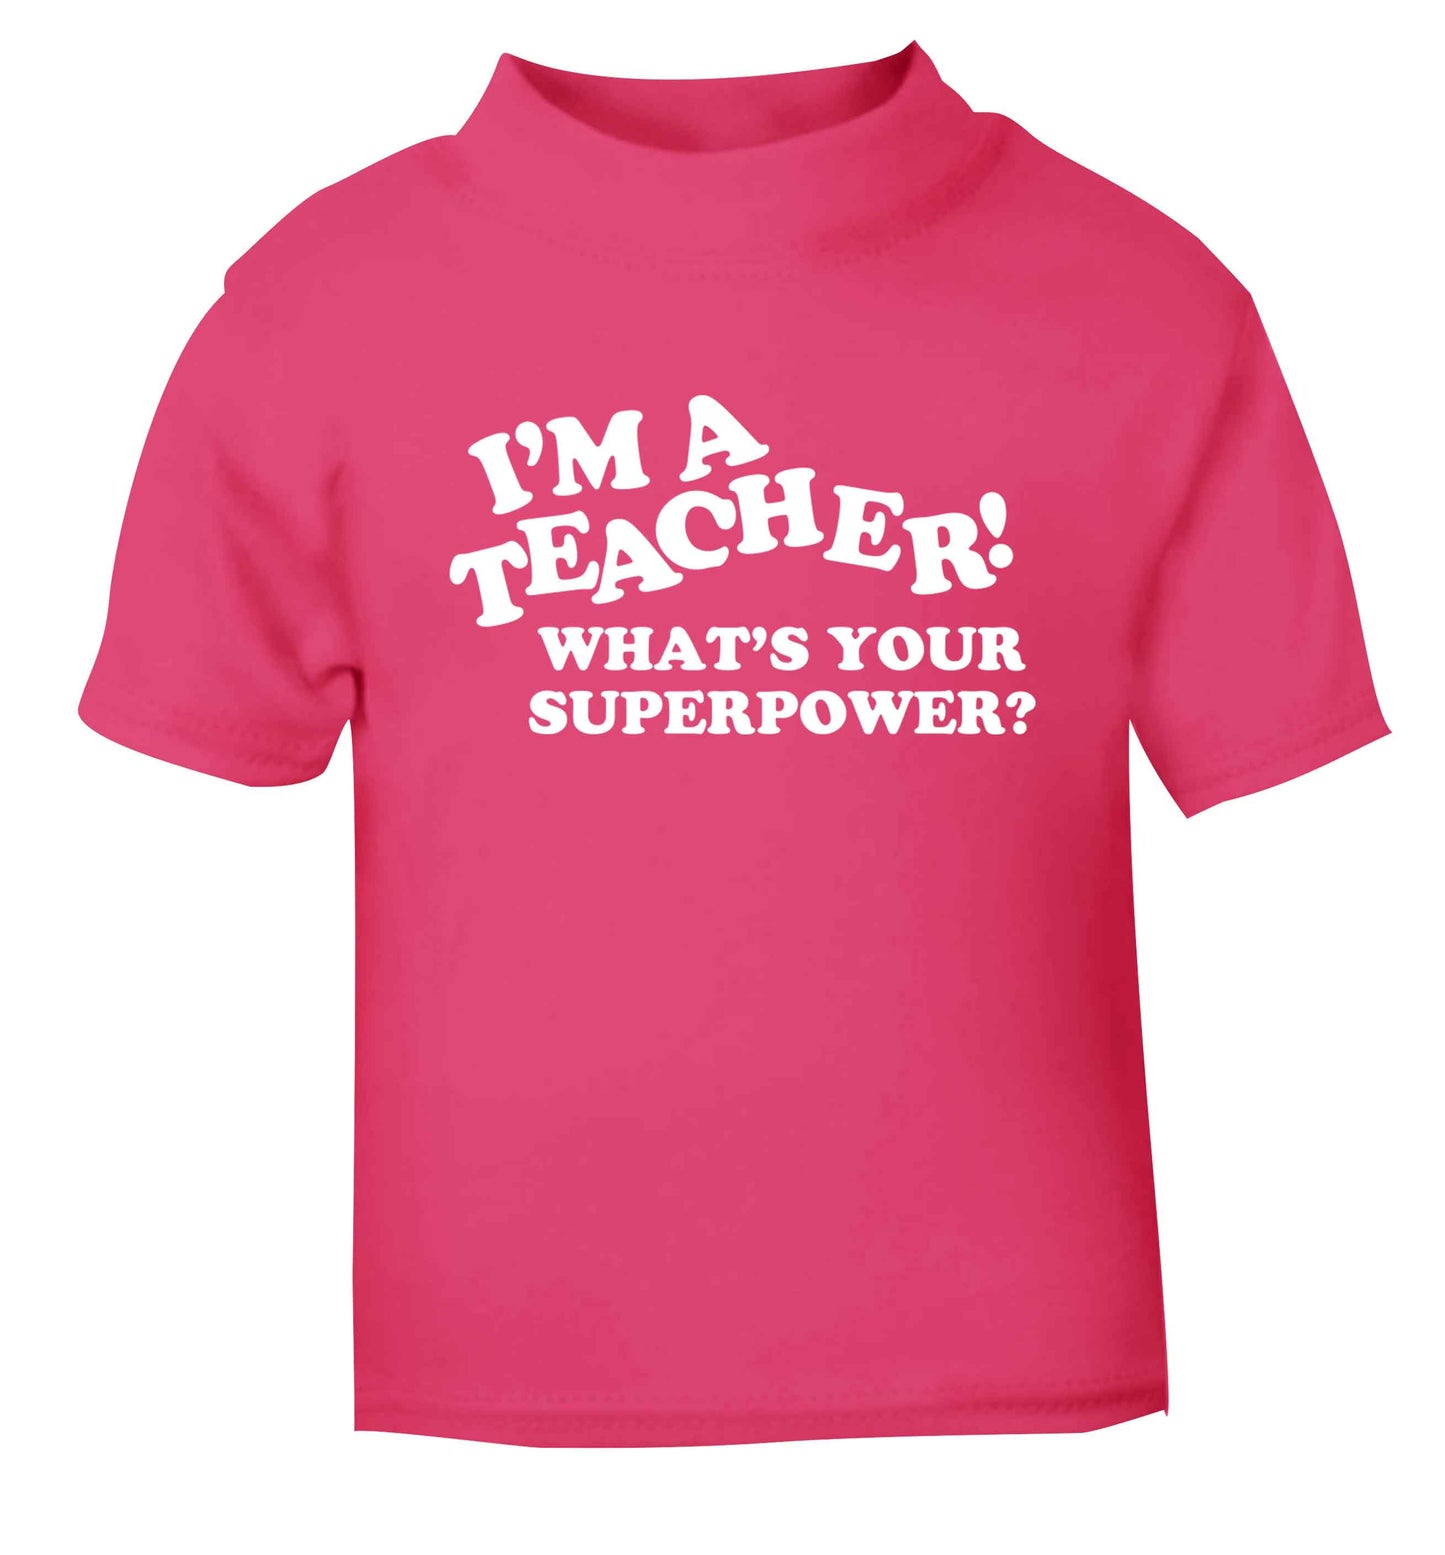 I'm a teacher what's your superpower?! pink baby toddler Tshirt 2 Years